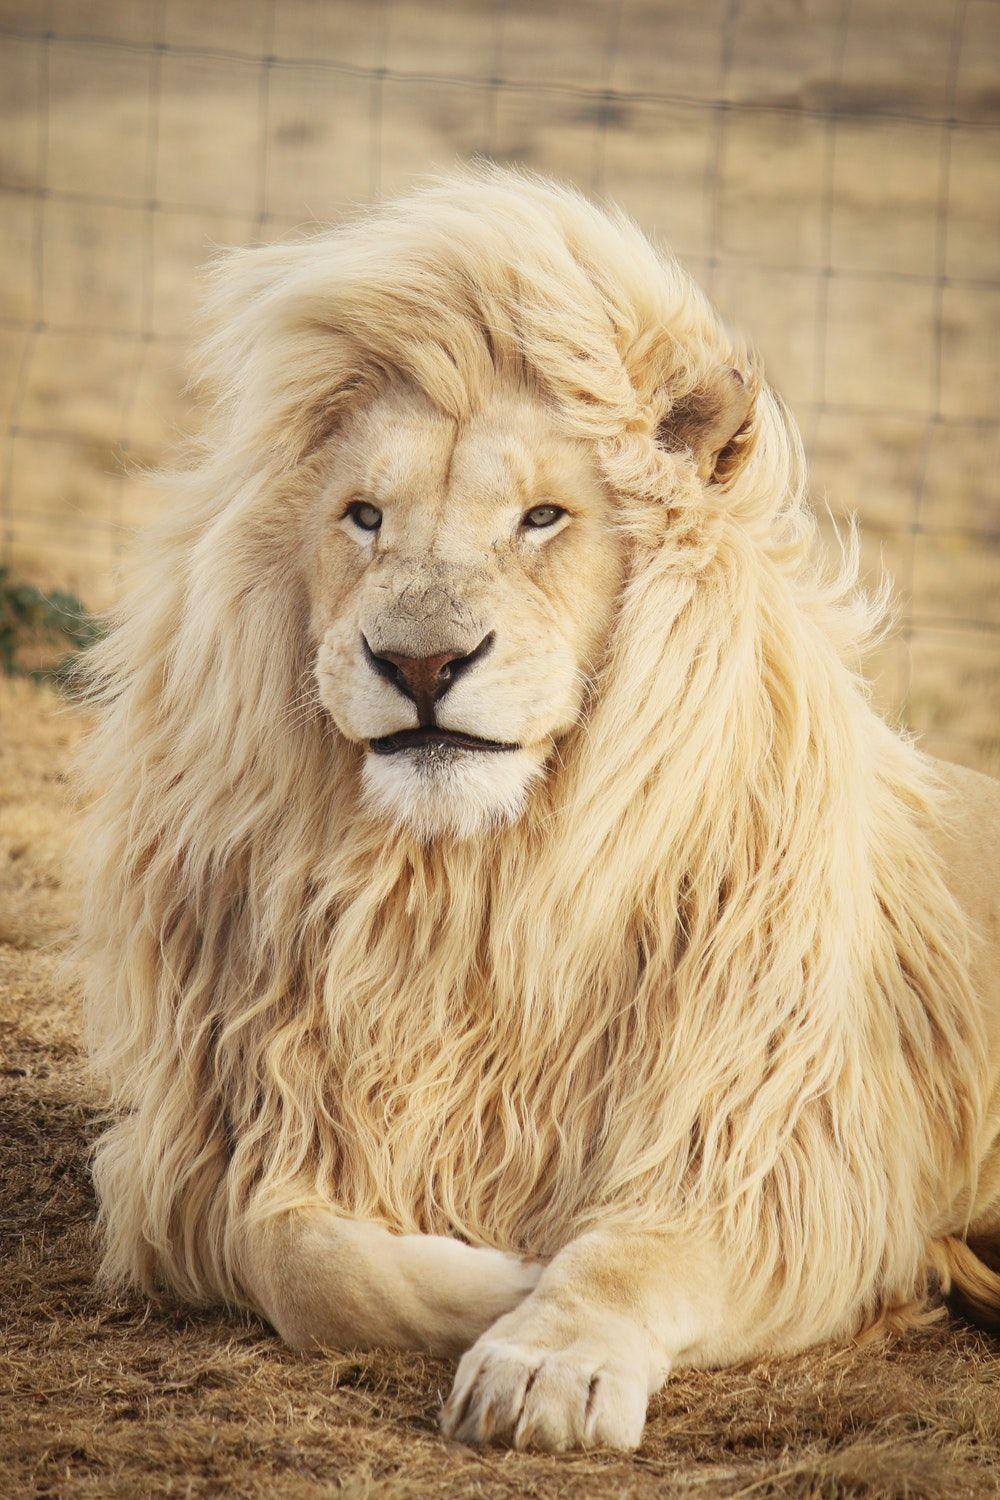 Lion Picture & Image. Download Free Image & Stock